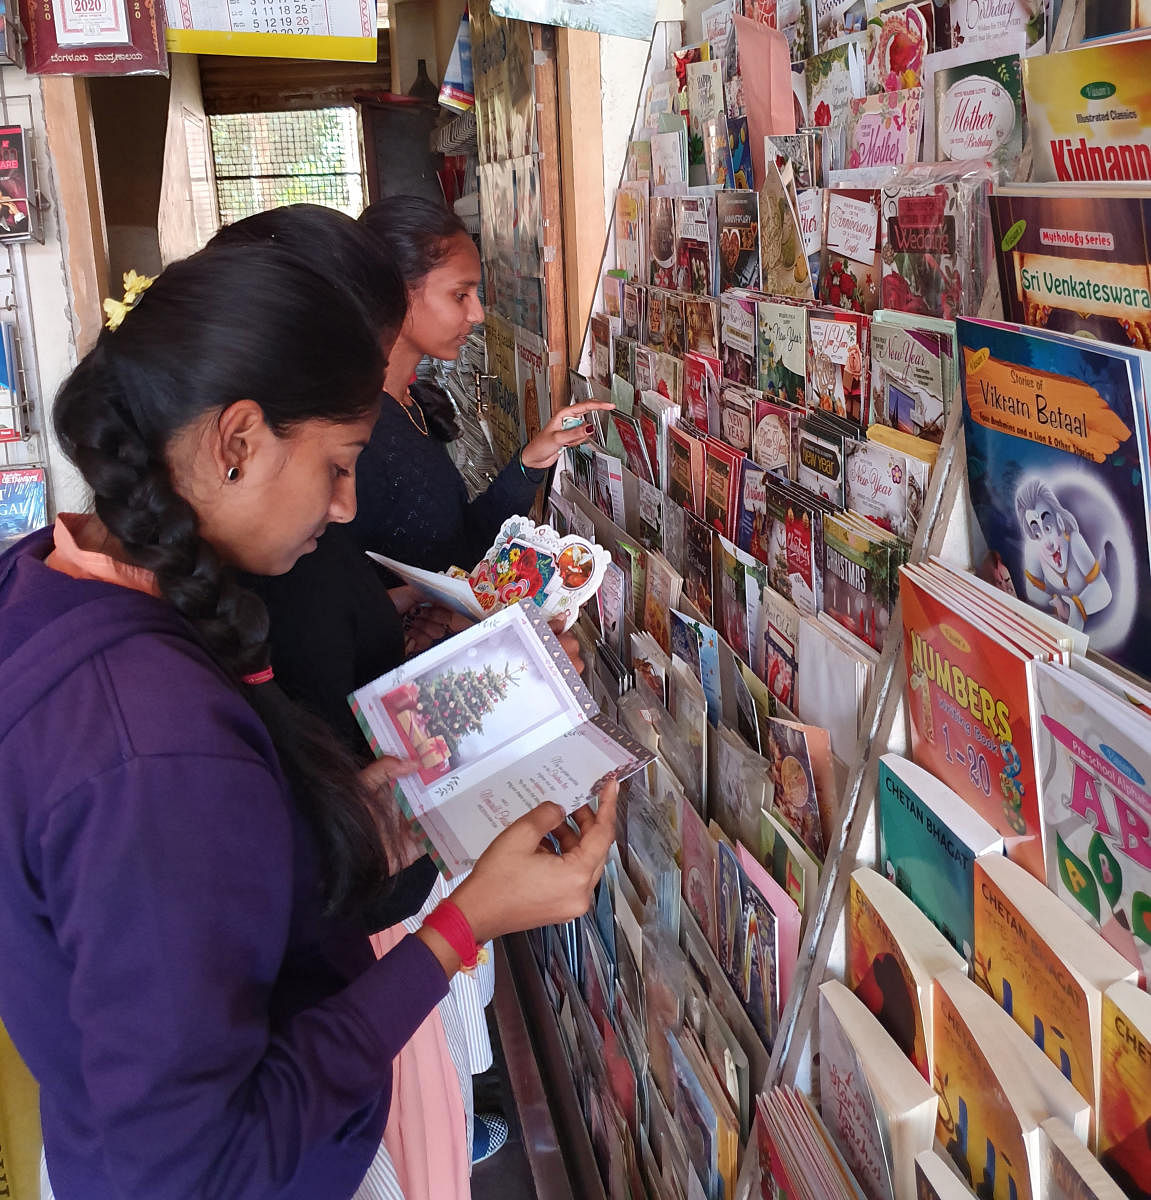 Students engaged in purchasing greeting cards at a book stall on M G Road in Chikkamagaluru.